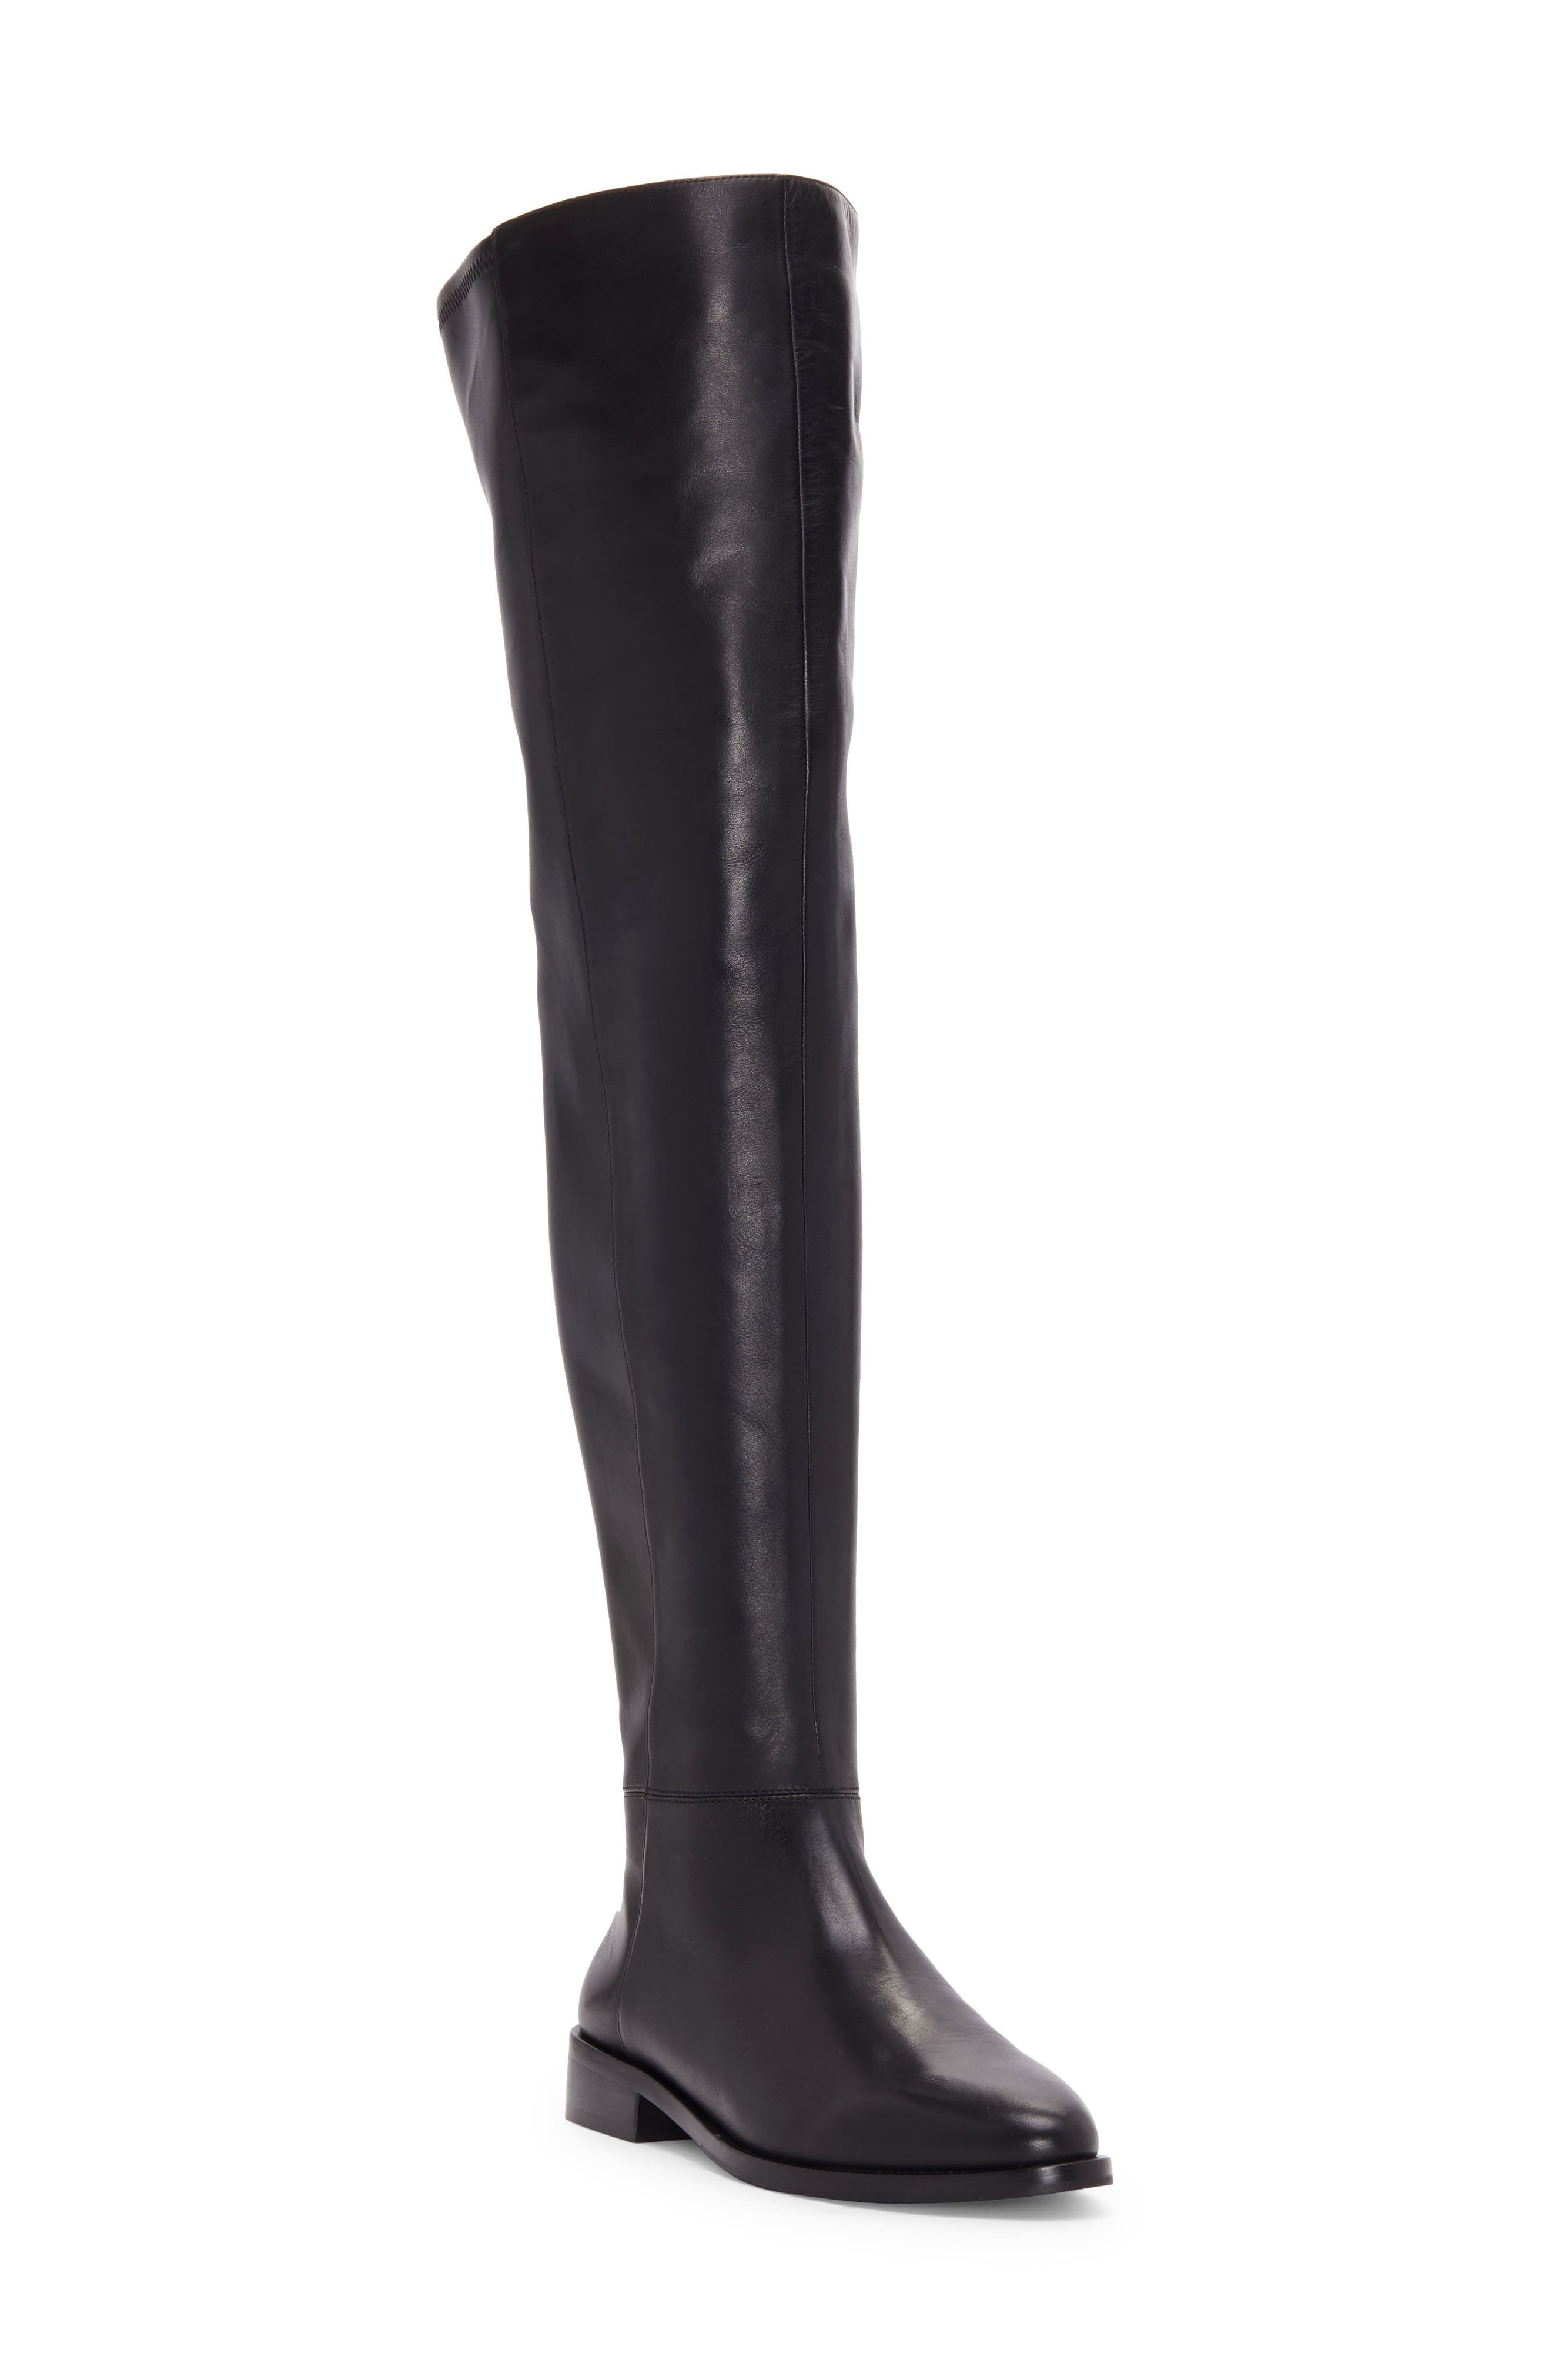 vince camuto black suede over the knee boots